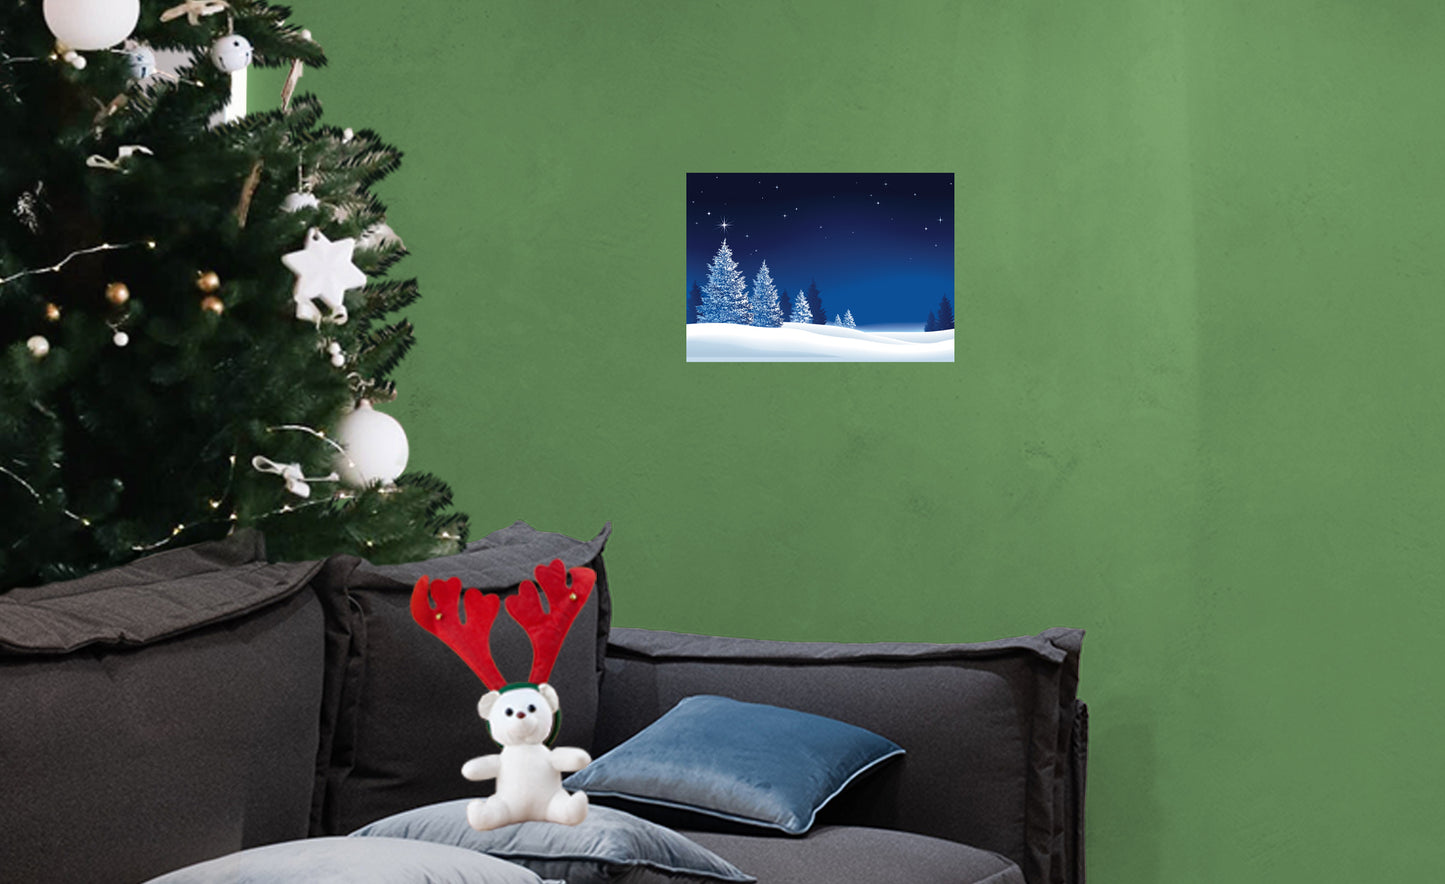 Christmas:  Bright Star Poster        -   Removable     Adhesive Decal